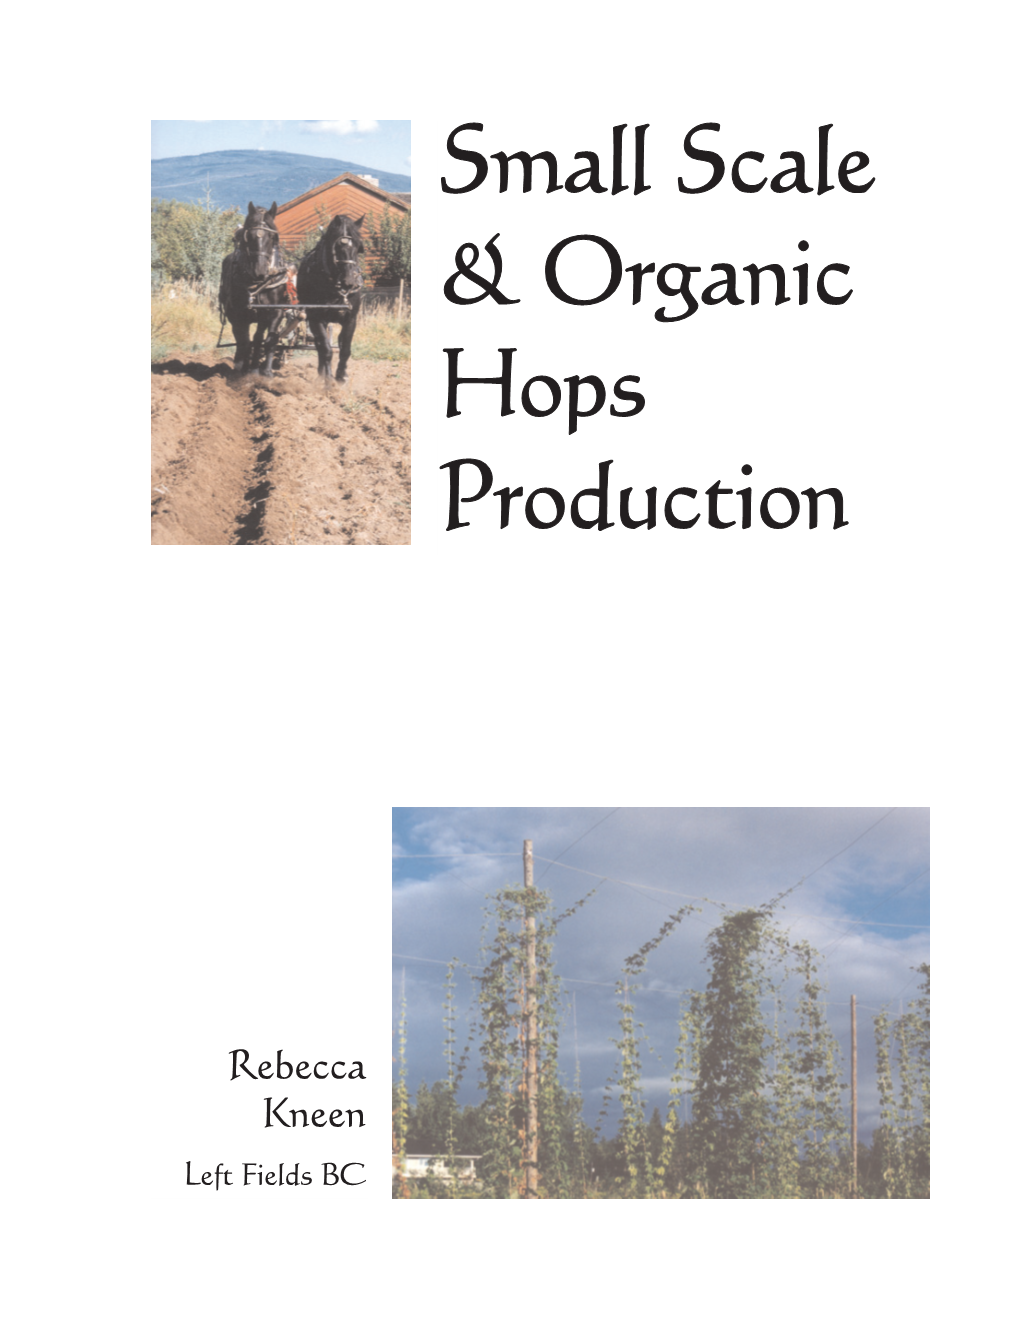 Small Scale and Organic Hops Production Introduction: the Project the Hops Project Started Because I Wanted Desperately to Grow Hops